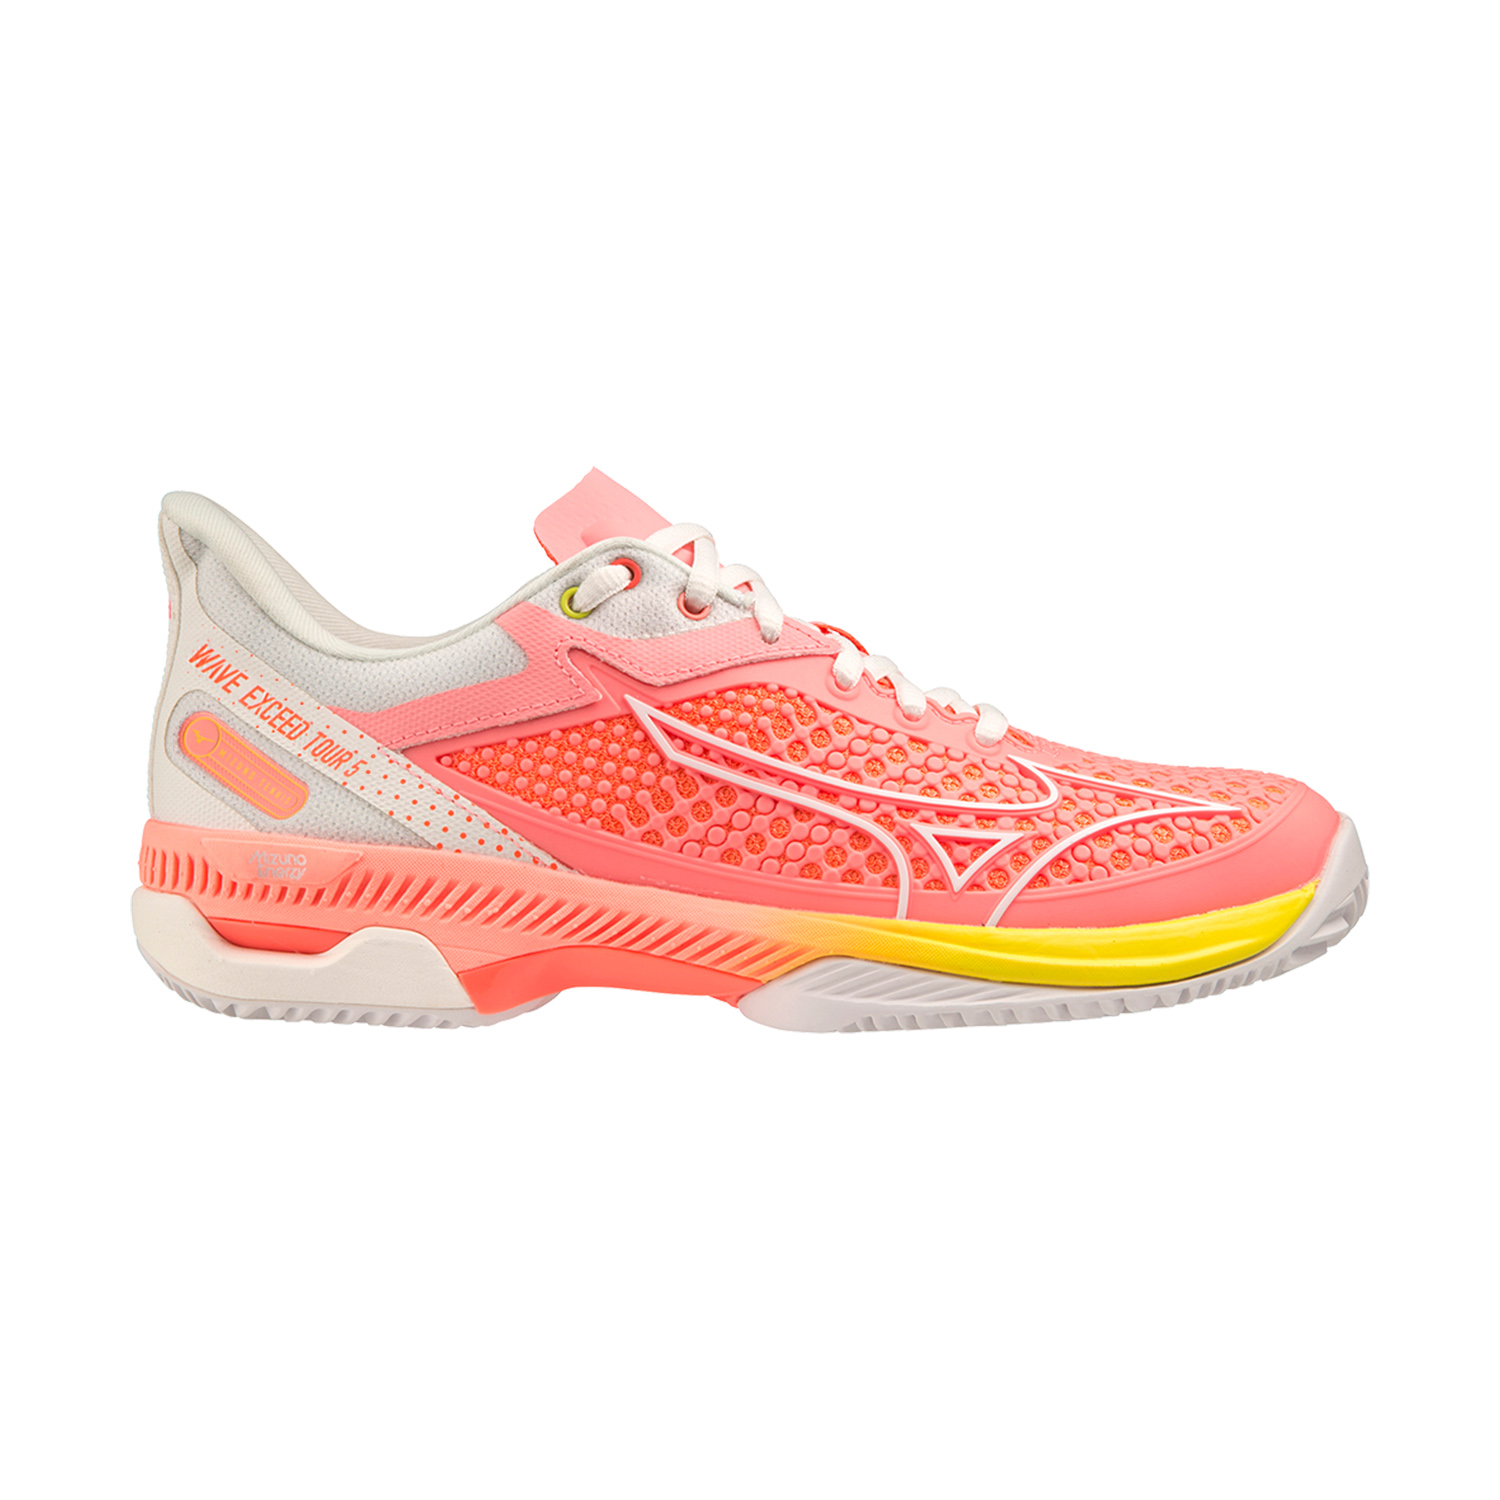 Mizuno Wave Exceed Tour 5 Clay - Candy Coral/Snow White/Neon Flame